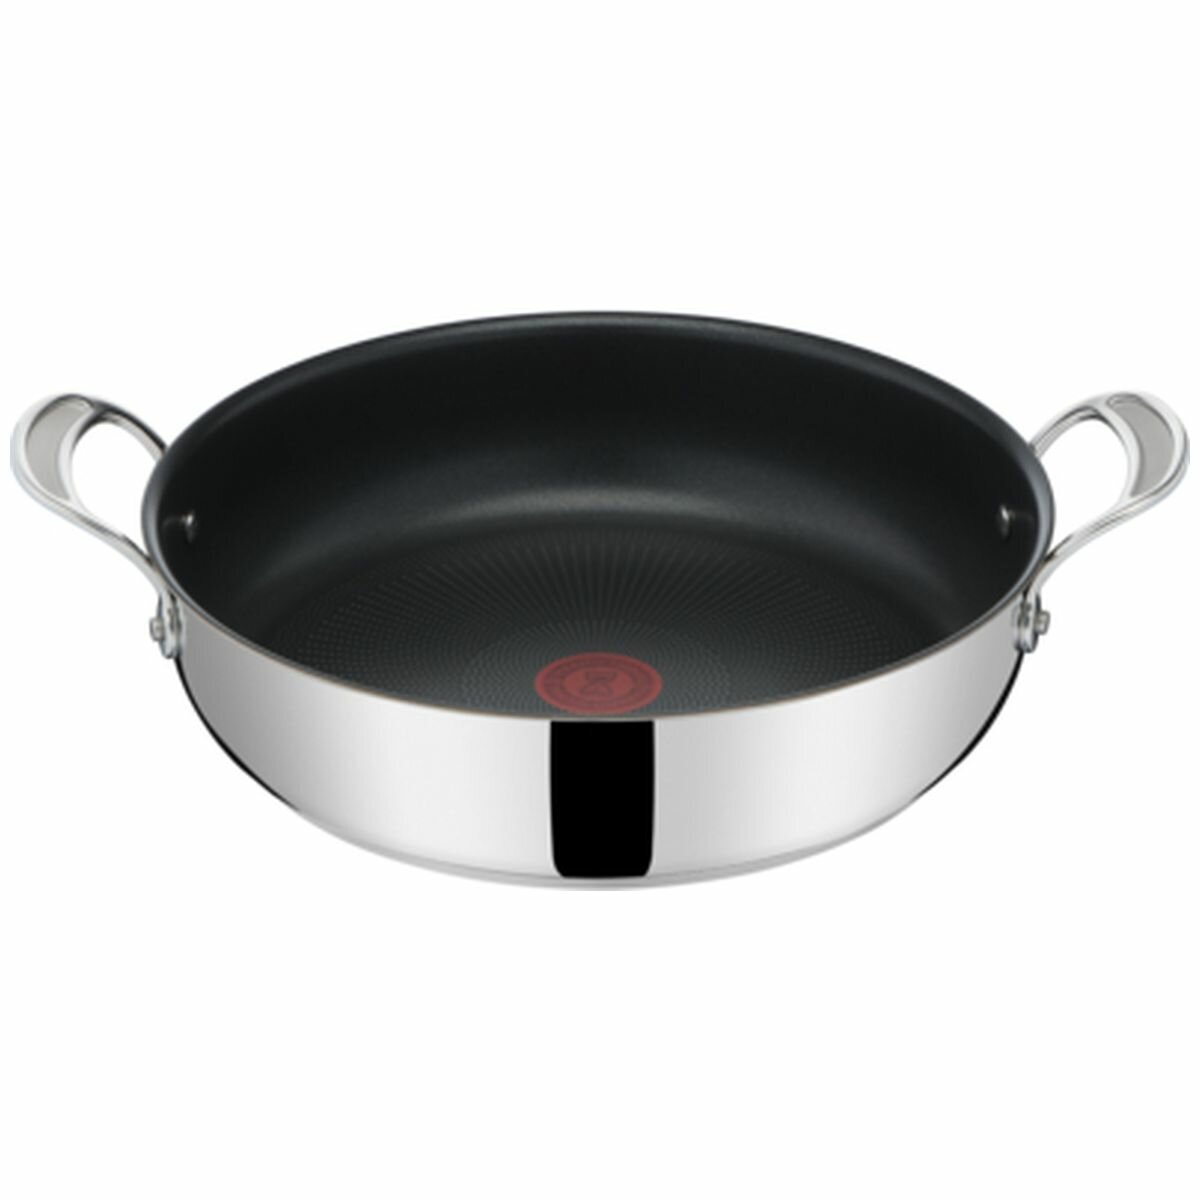 Tefal E3069034 Shallow pan, 30cm, Jamie Oliver, Stainless Steel